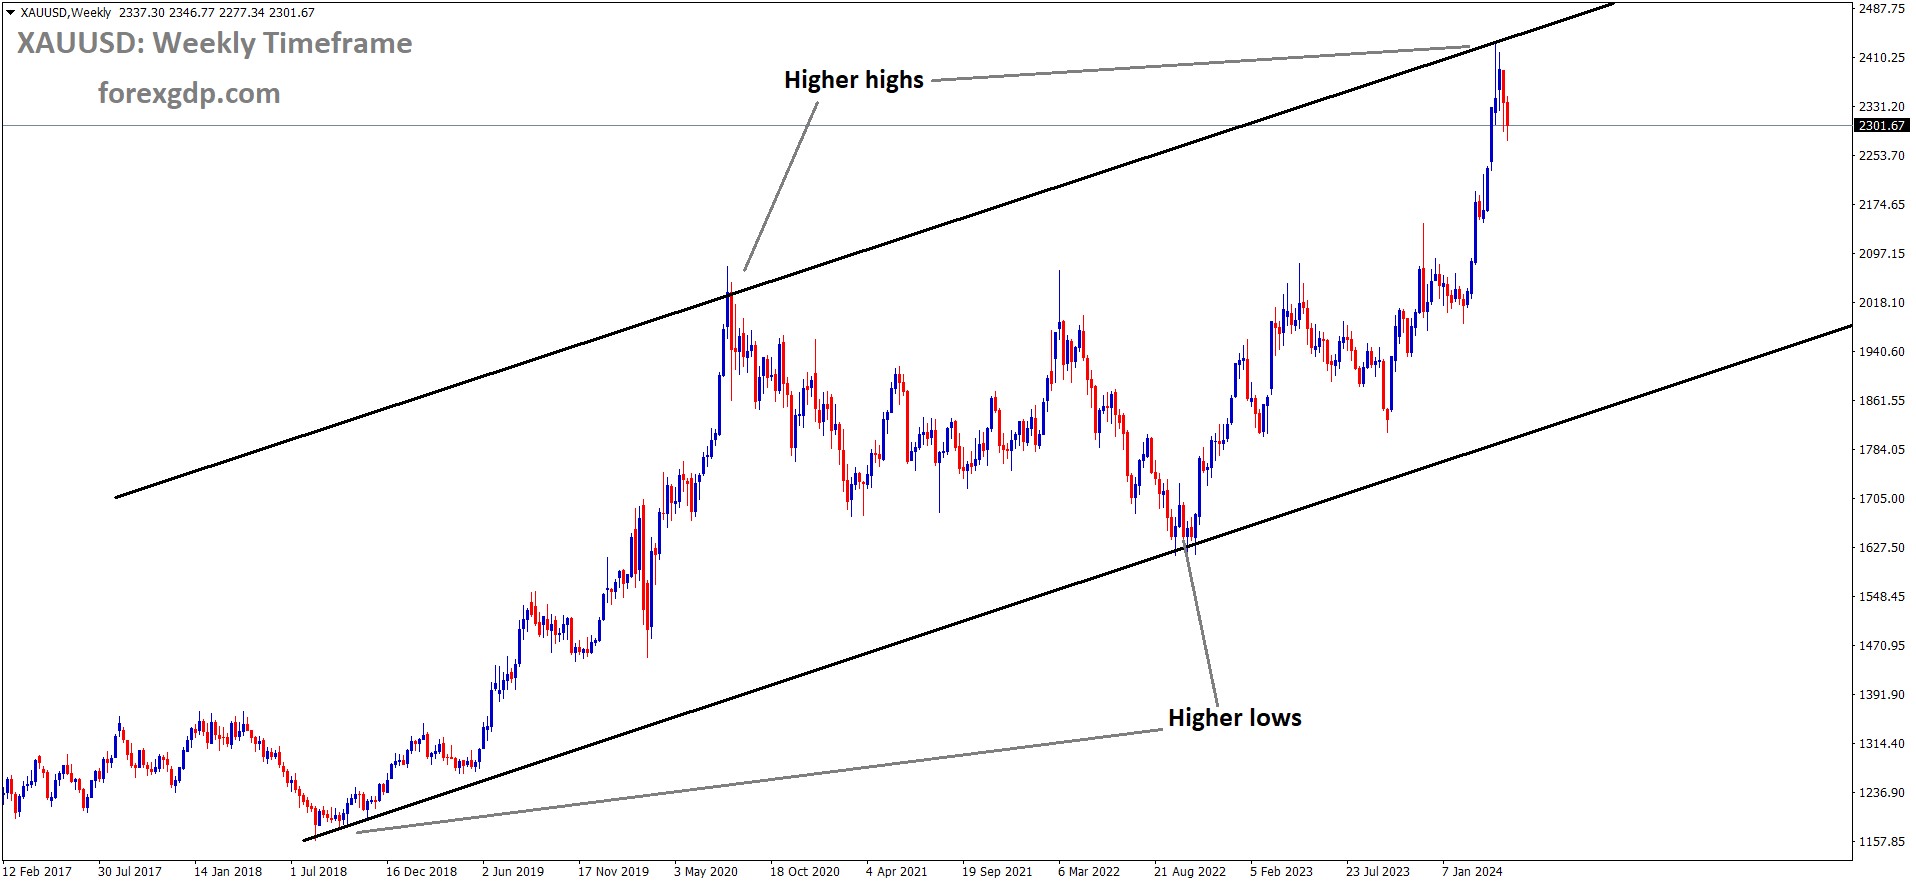 XAUUSD is moving in Descending channel and market has fallen from the higher high area of the channel